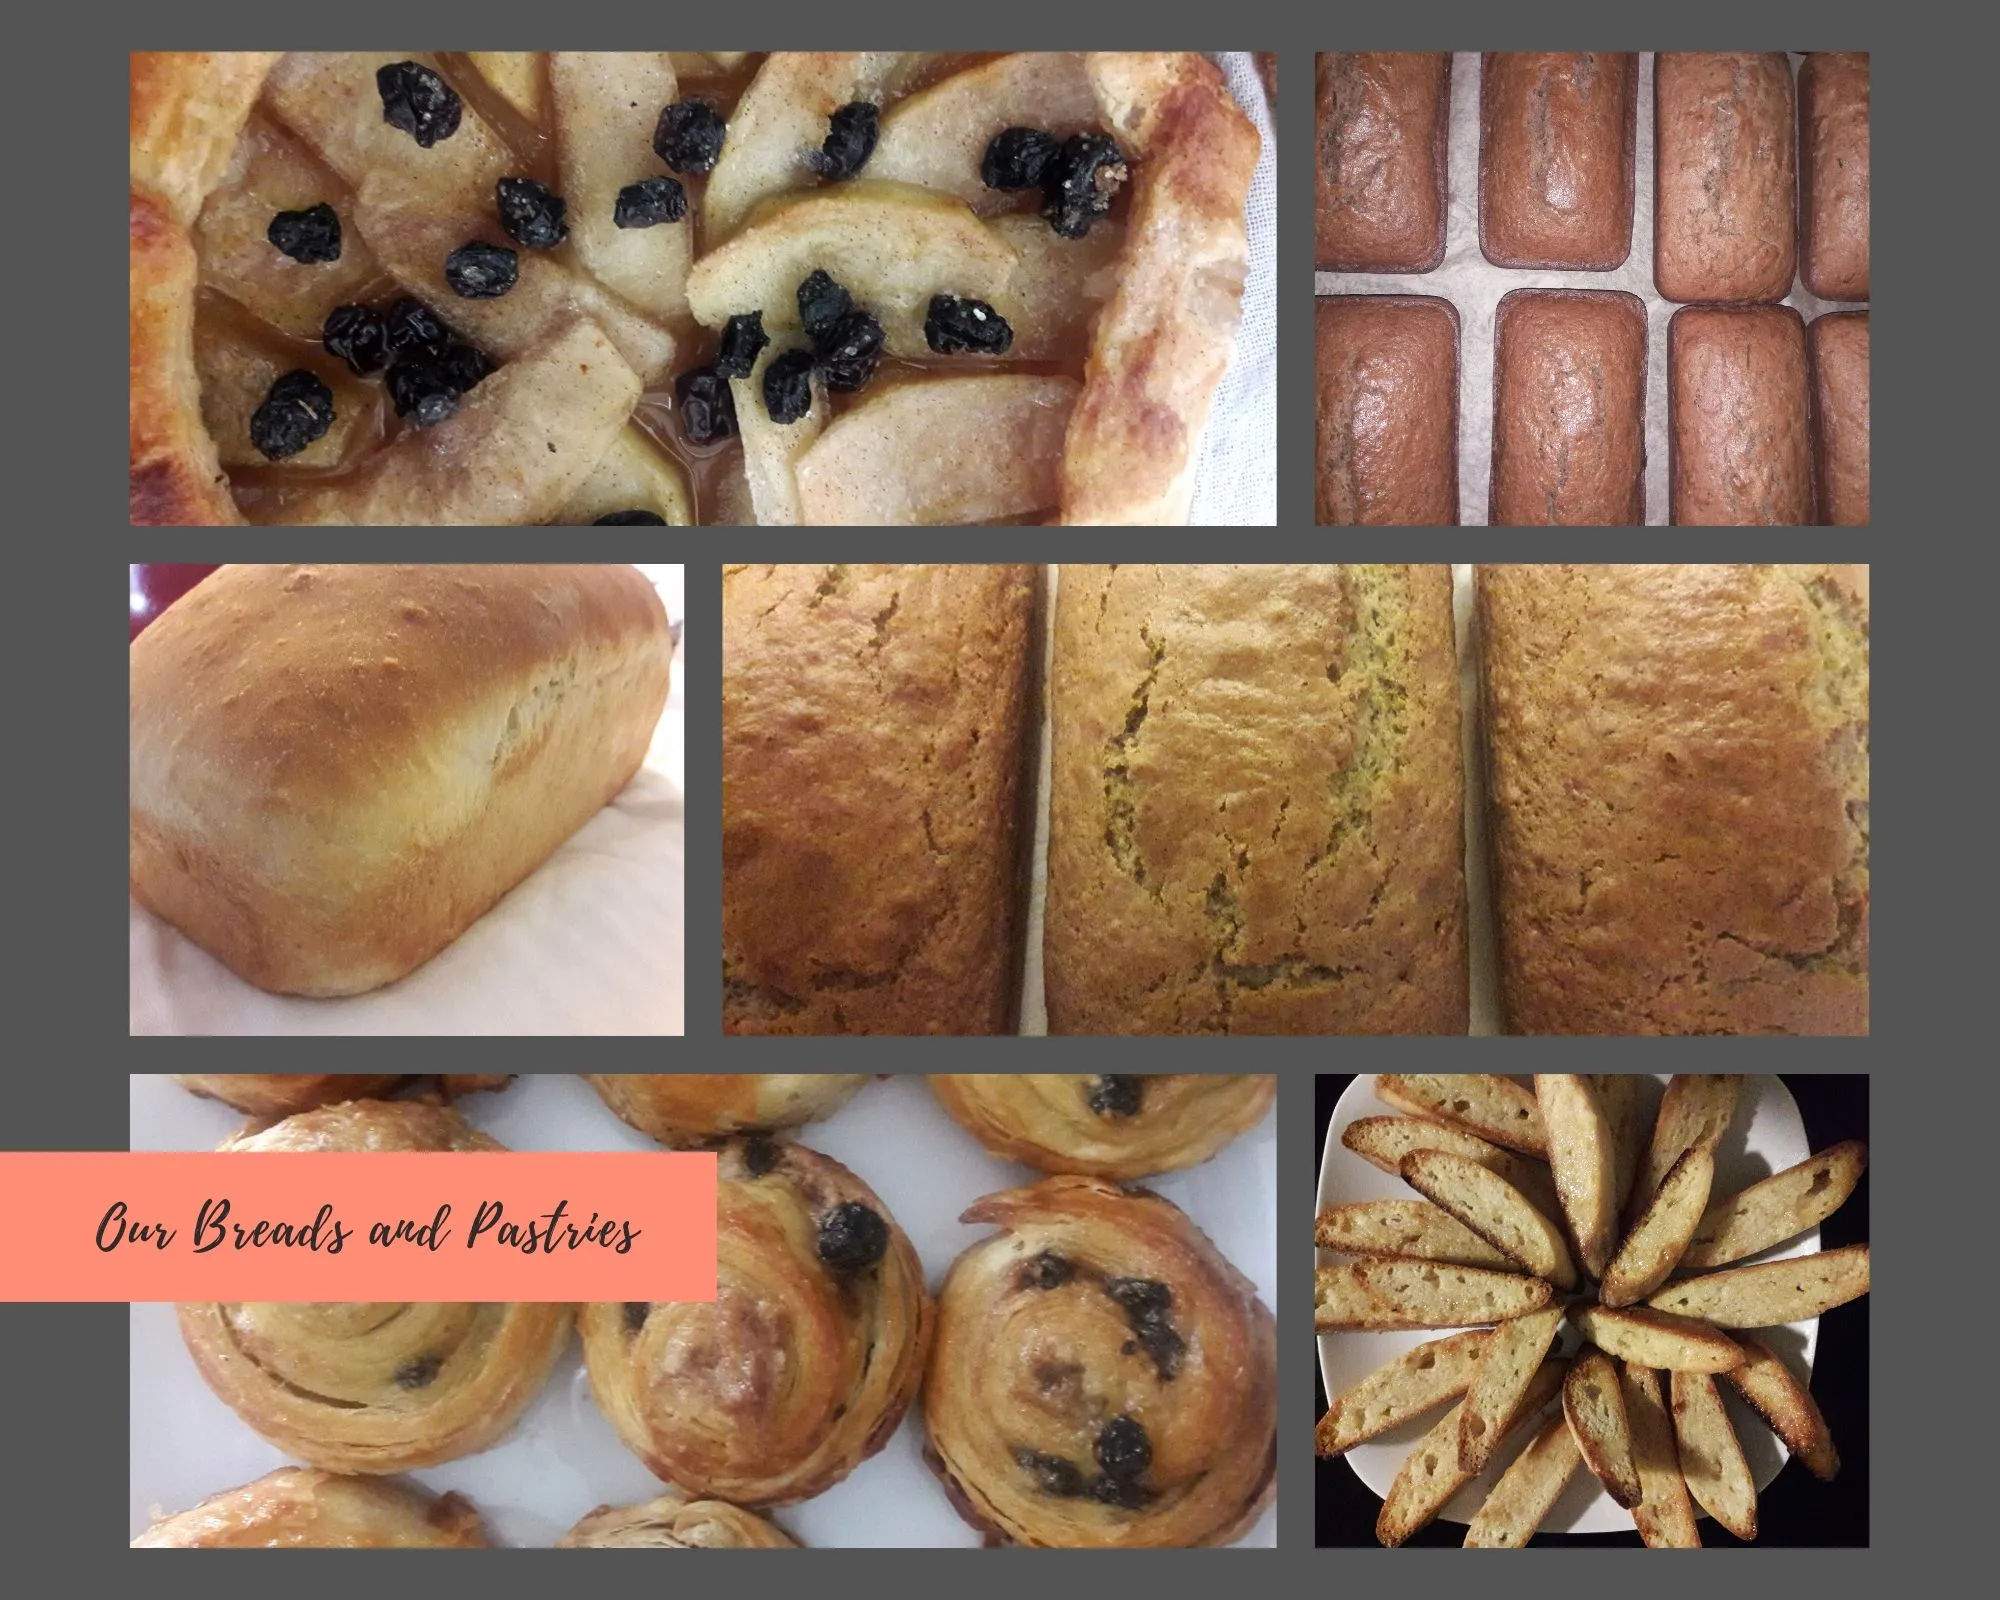 Our Breads and Pastries